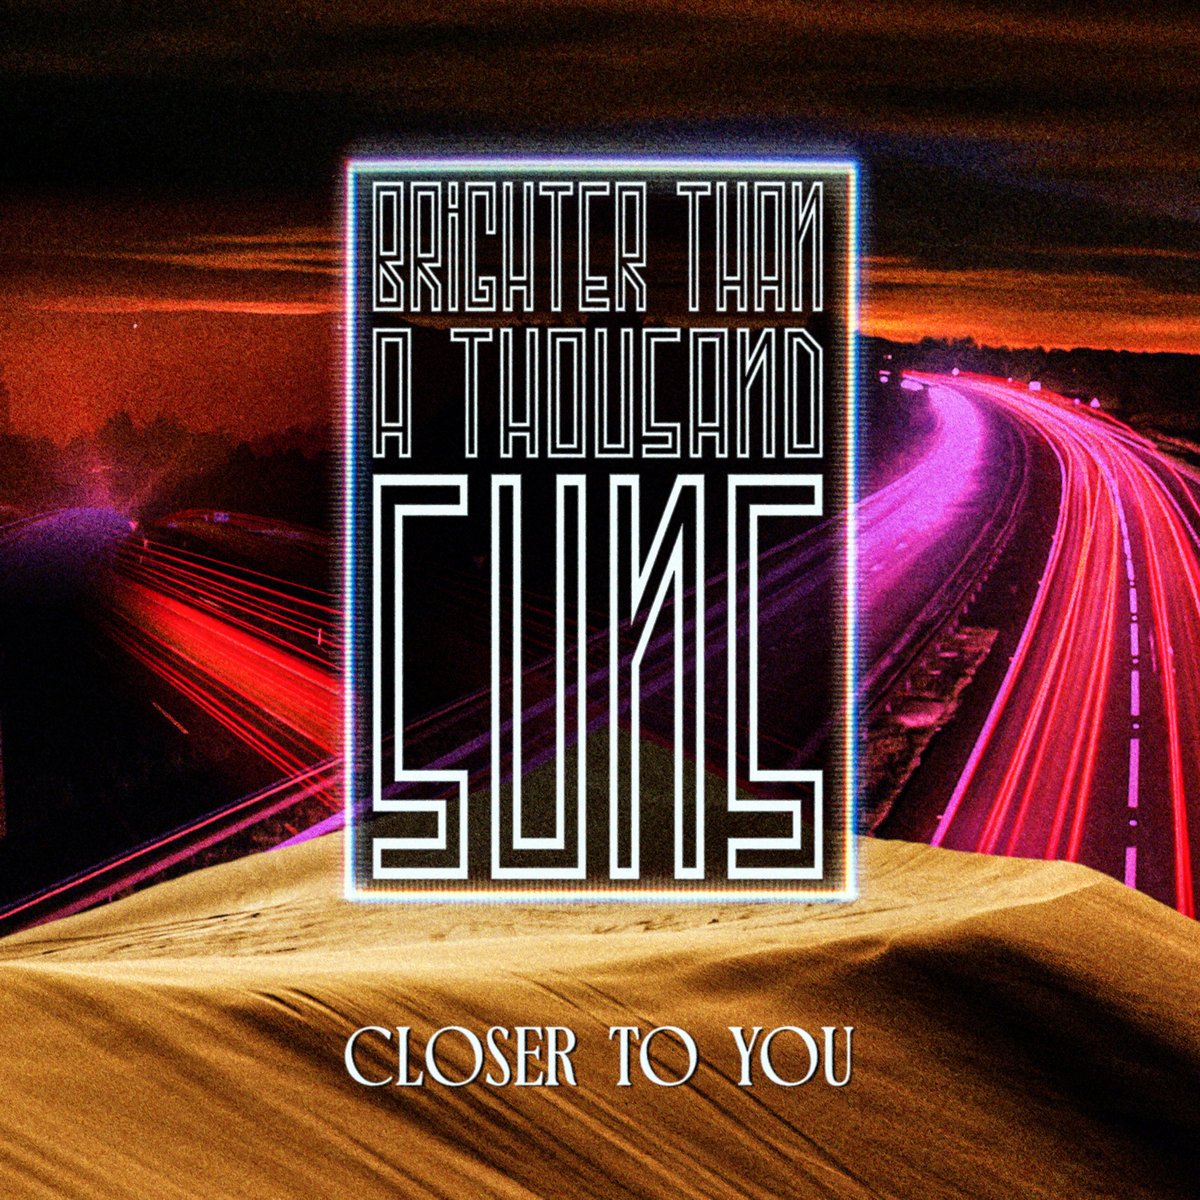 Straight out of the best dance club hits of 1980something, it's CLOSER TO YOU by @btatsband! open.spotify.com/track/2sDrFgPu… brighterthanathousandsuns.bandcamp.com/track/closer-t… youtube.com/watch?v=-y8B0d… #synthwave #synthwaveultra